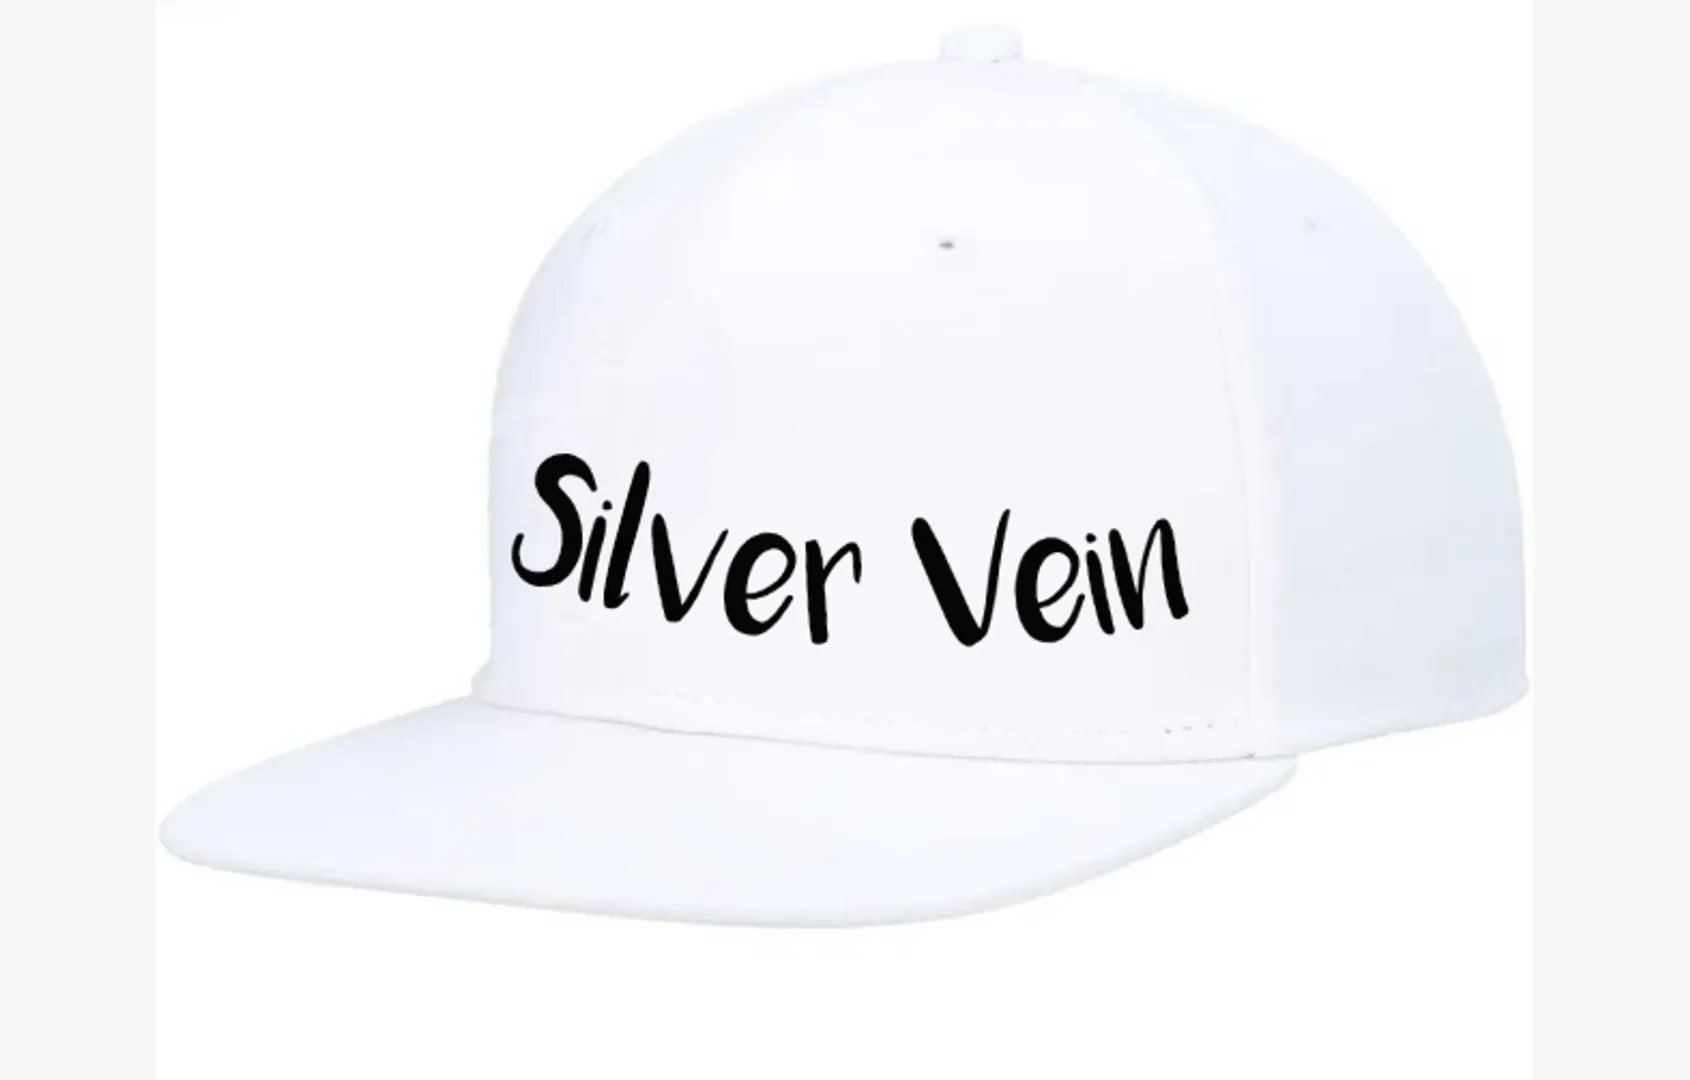 Introducing the Silver Vein clothing line.